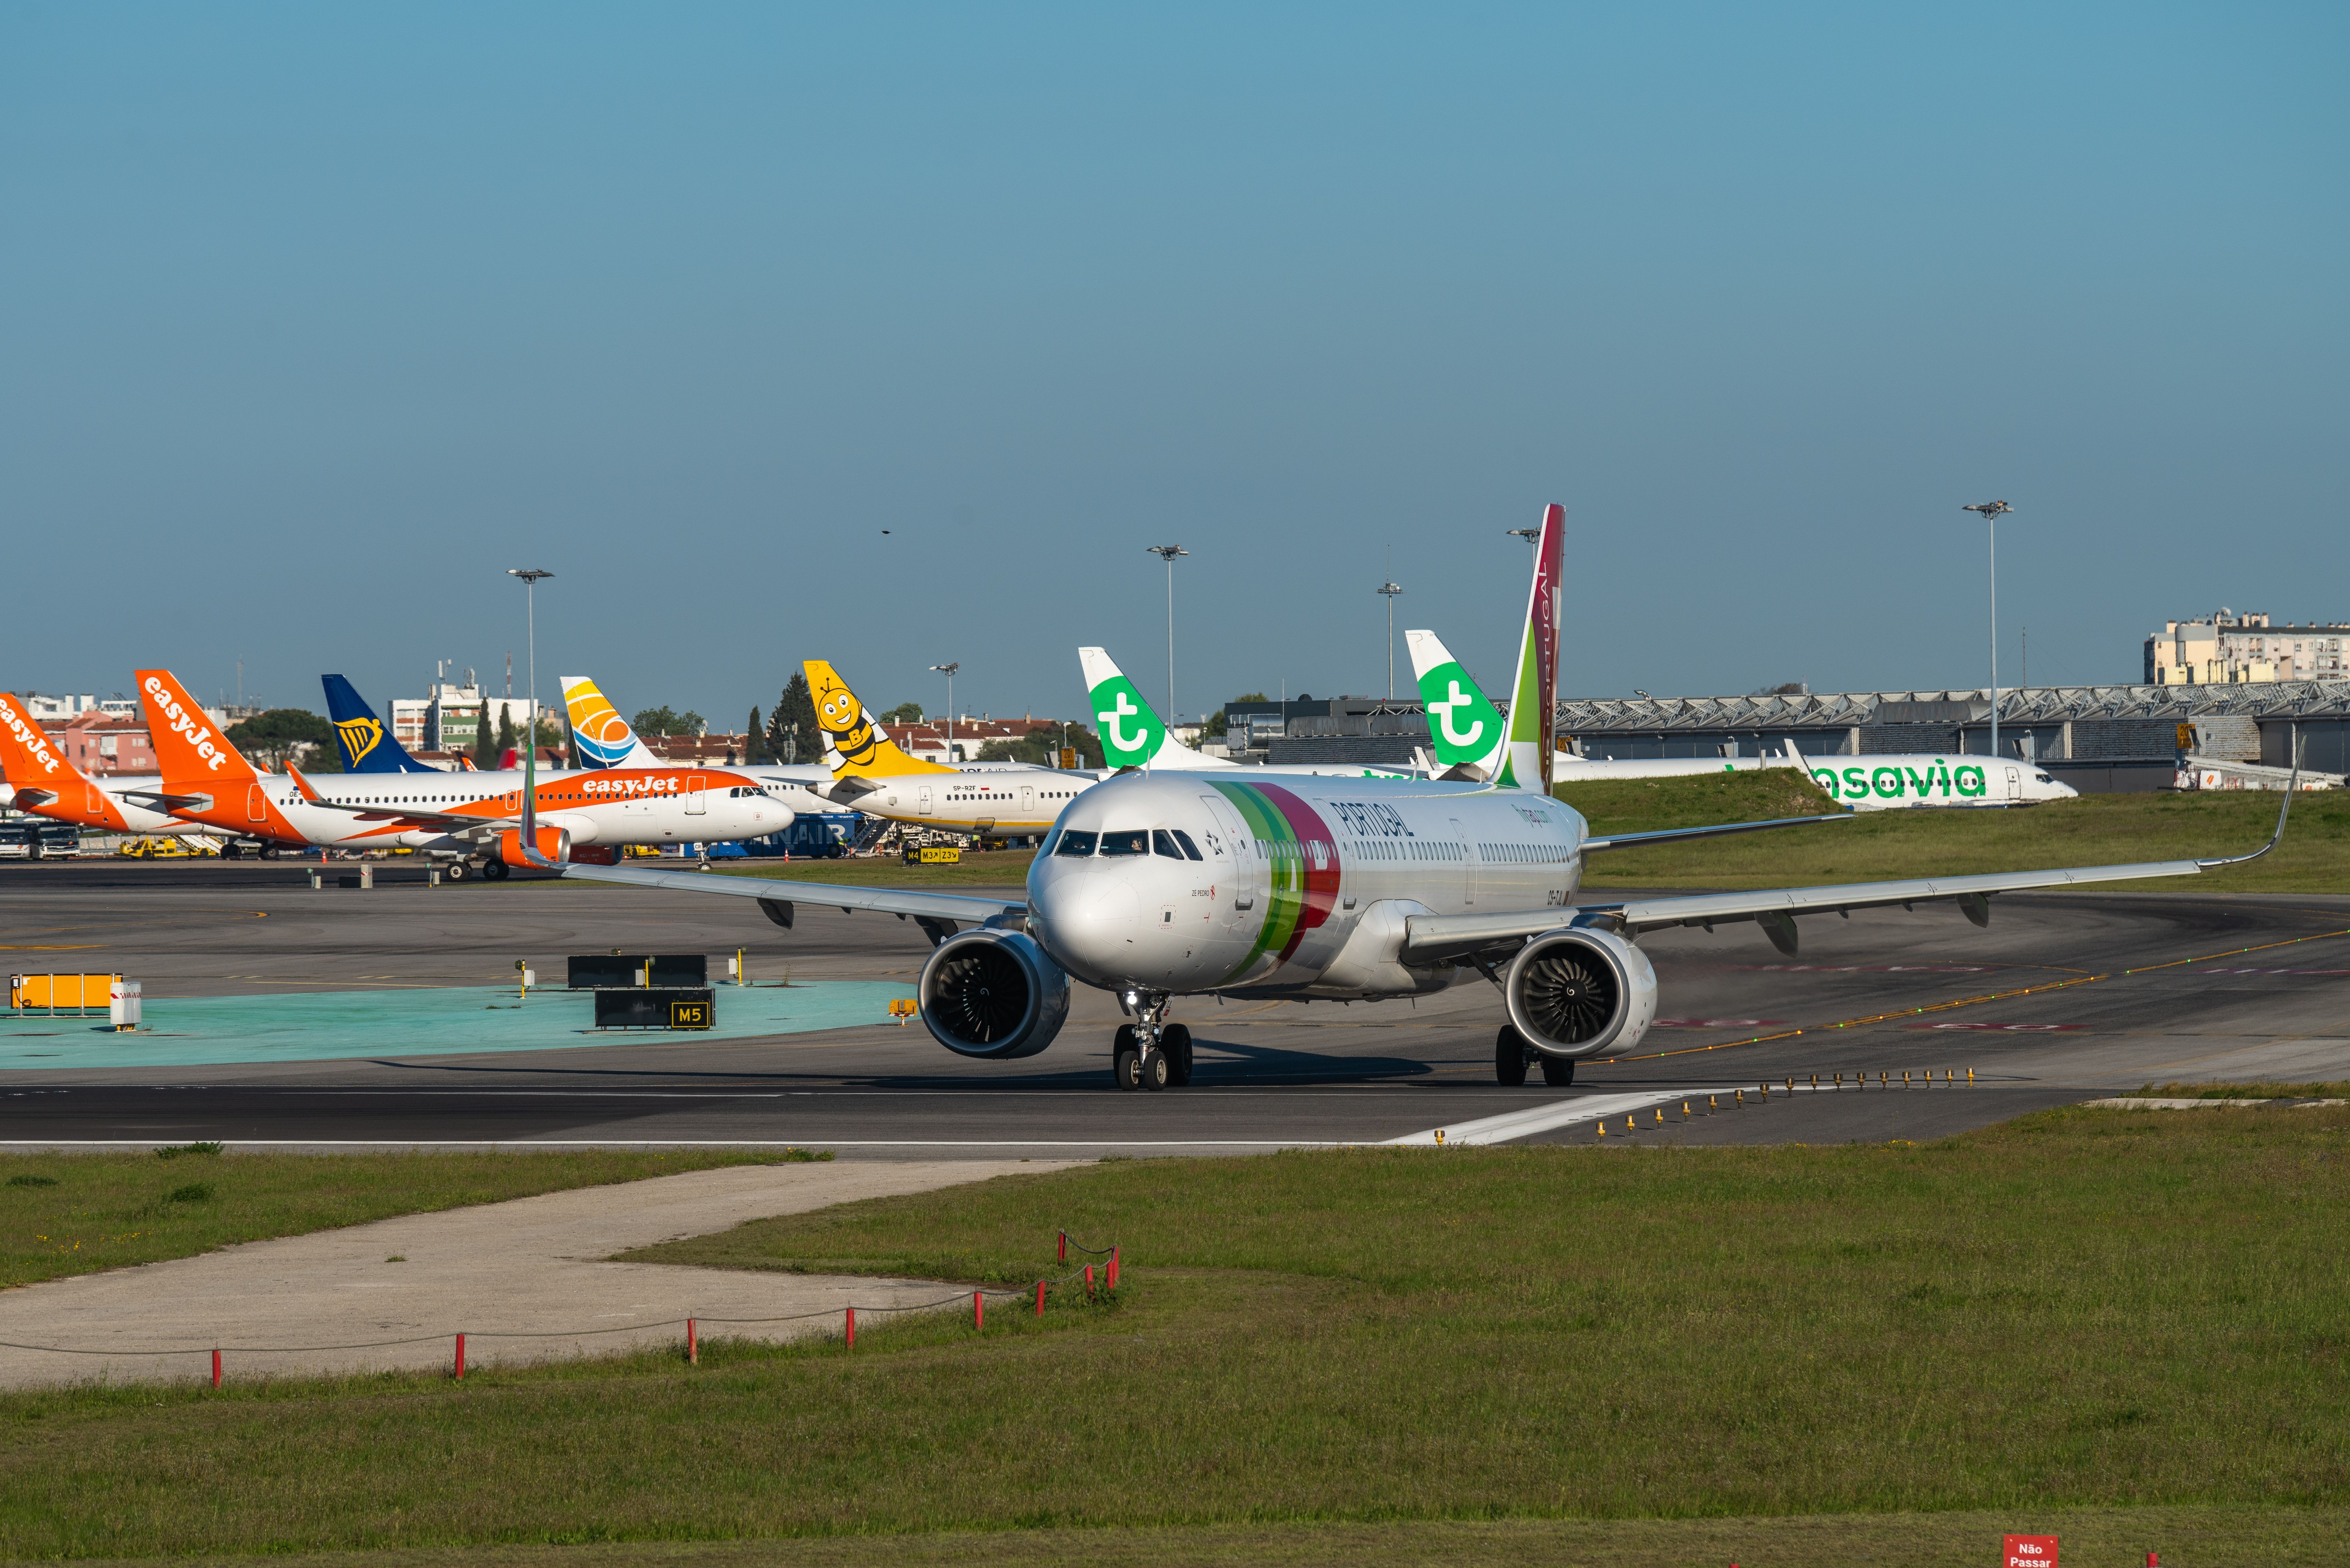 Shutterstock_2156895009 - LISBON, PORTUGAL - APRIL 15, 2022: Airplane Airbus A321-251N of airline TAP Portugal waiting for takeoff orders at Lisbon Airport